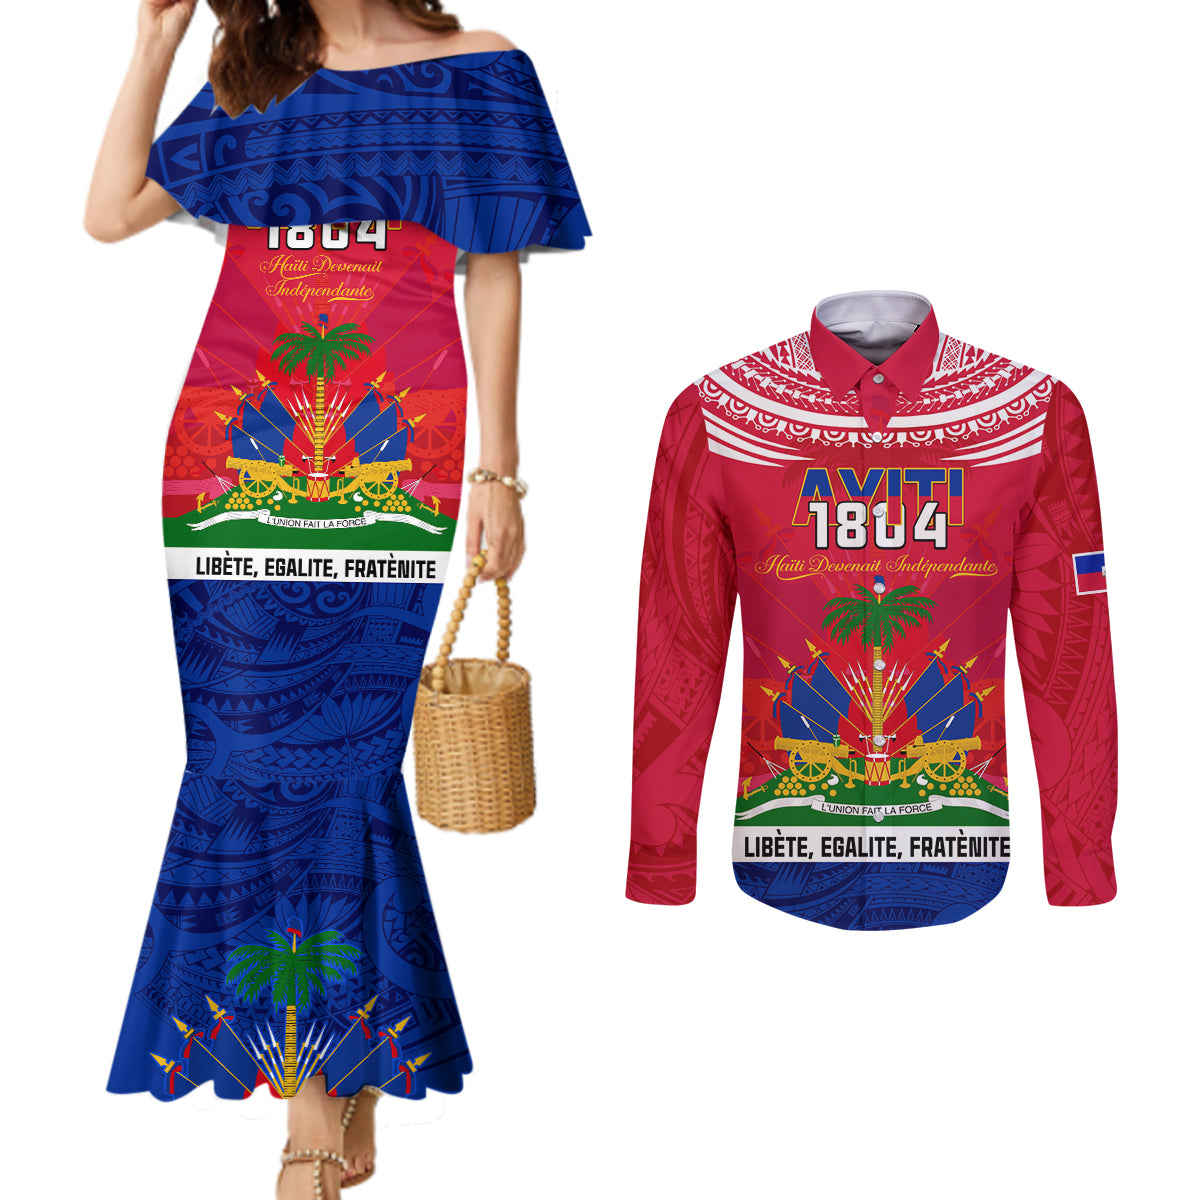 haiti-independence-day-couples-matching-mermaid-dress-and-long-sleeve-button-shirt-libete-egalite-fratenite-ayiti-1804-with-polynesian-pattern